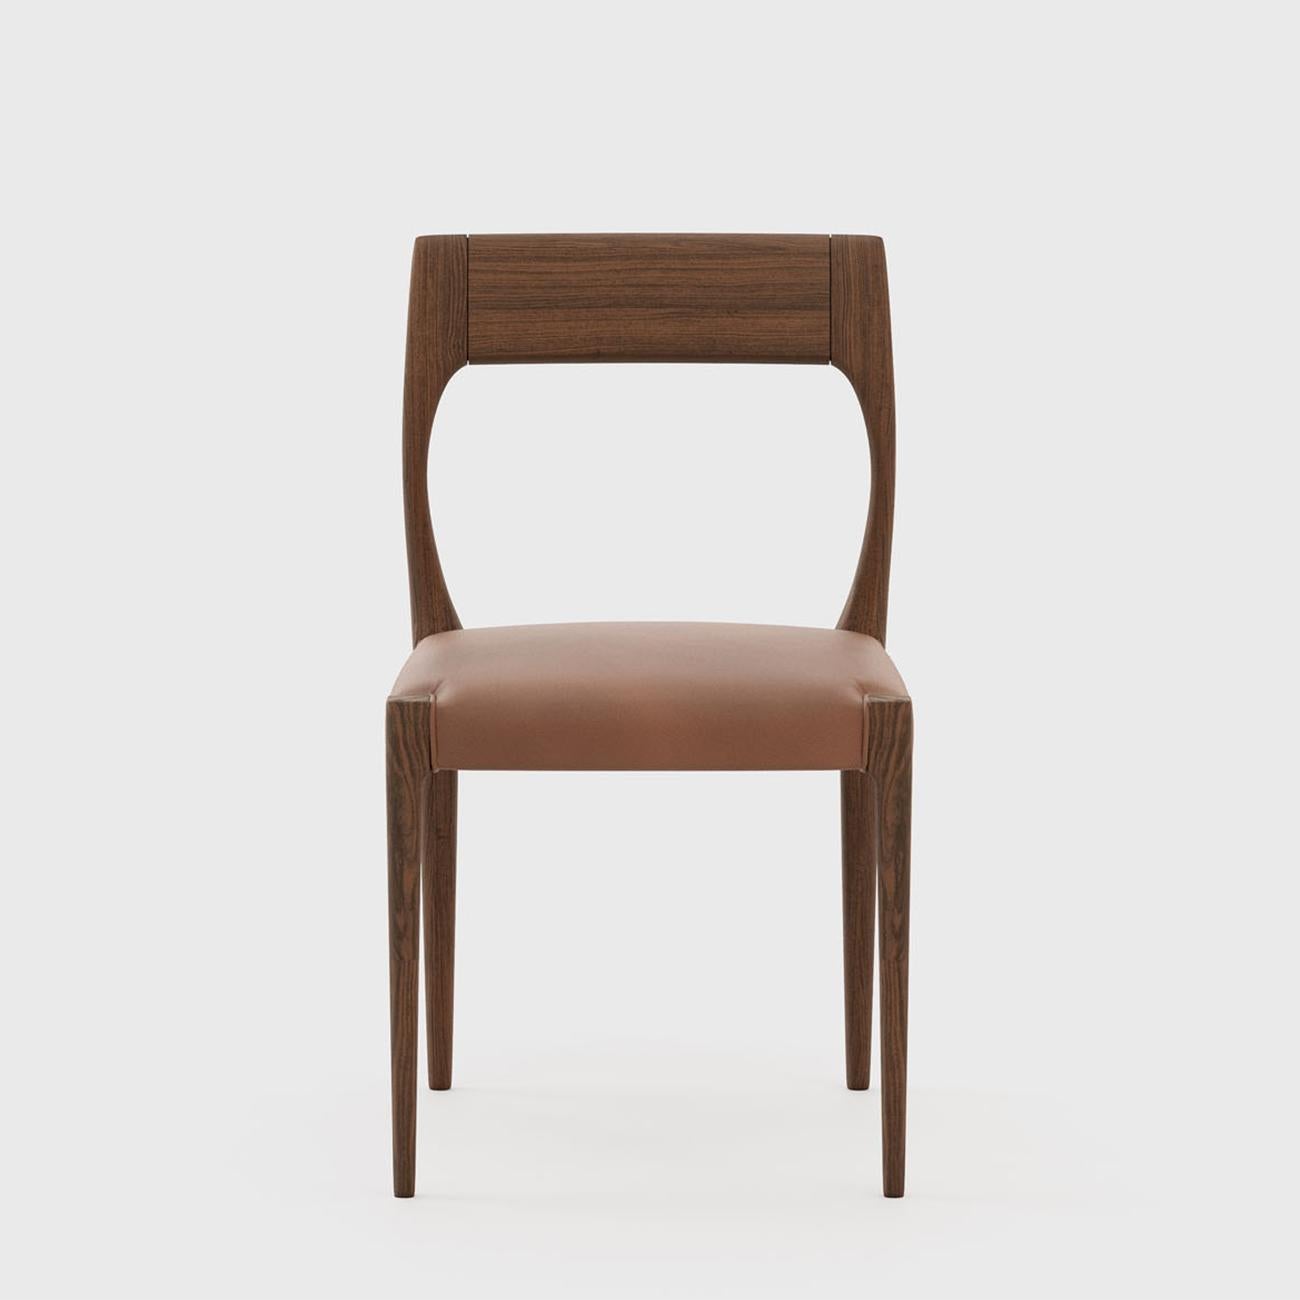 Chair Lofi with structure in walnut wood in matte finish,
with seat upholstered and covered with red earth leather.
Also available with other leather or fabric, on request.